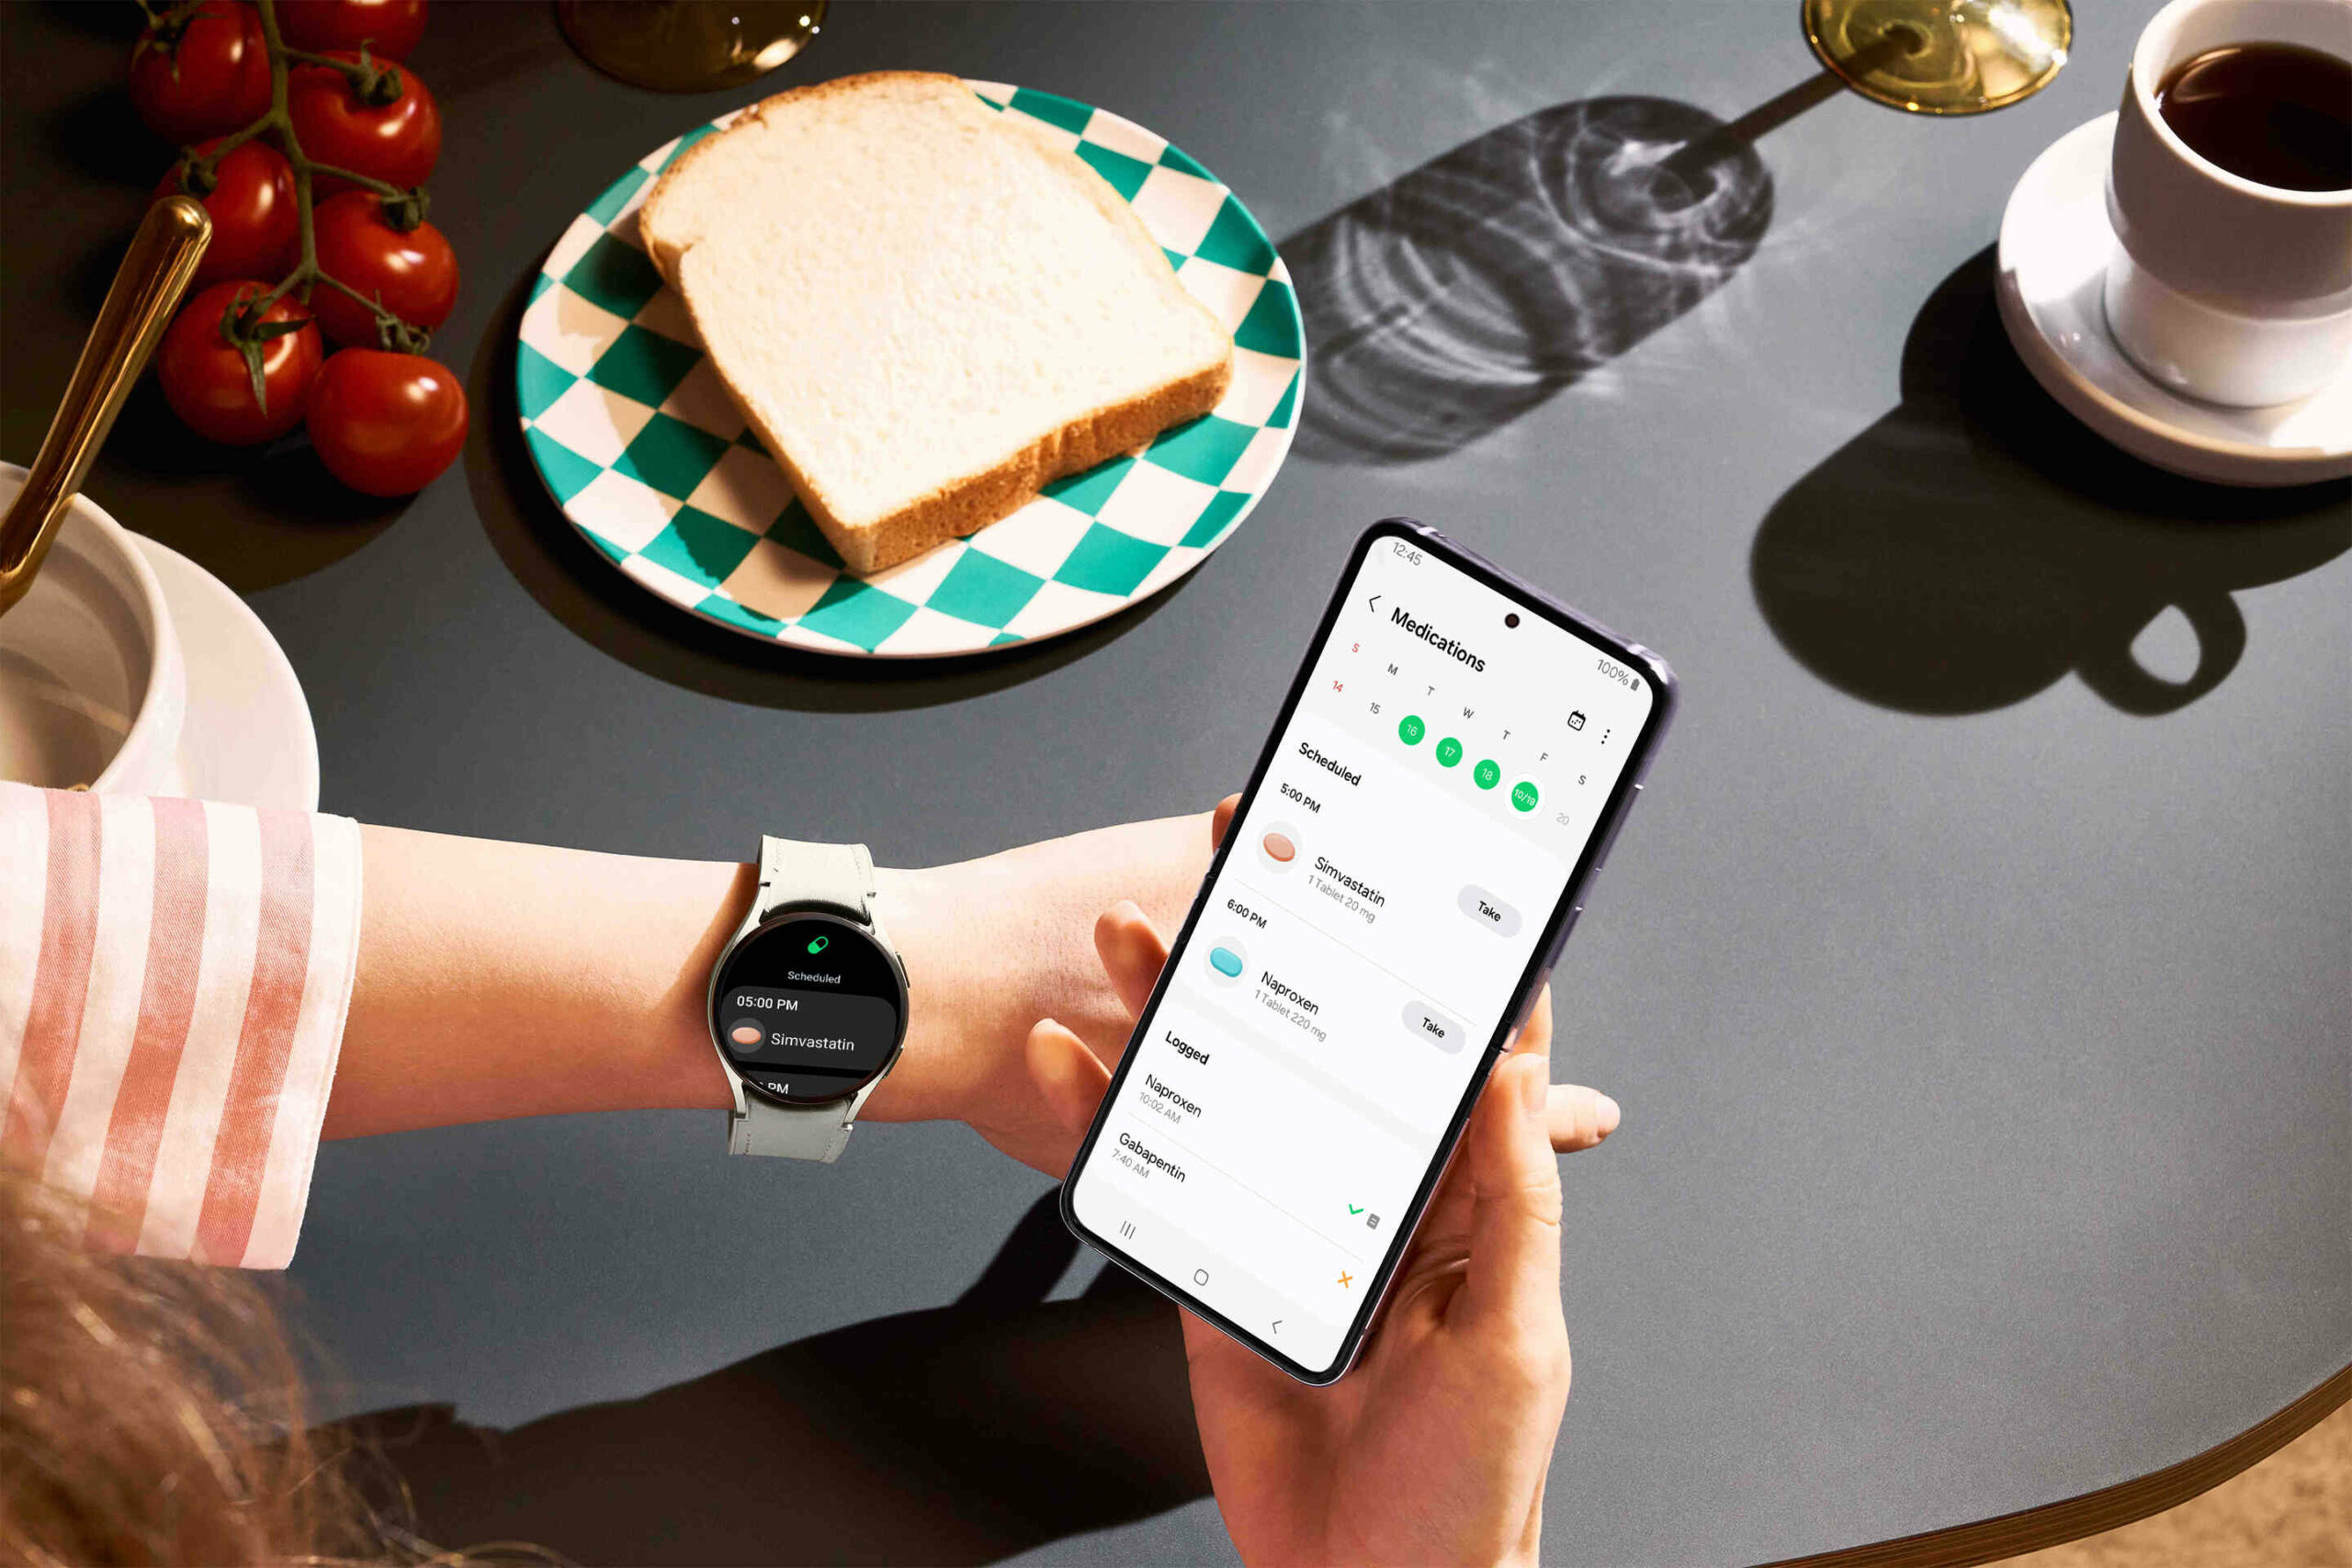 Photo of the Samsung health medications tracking feature